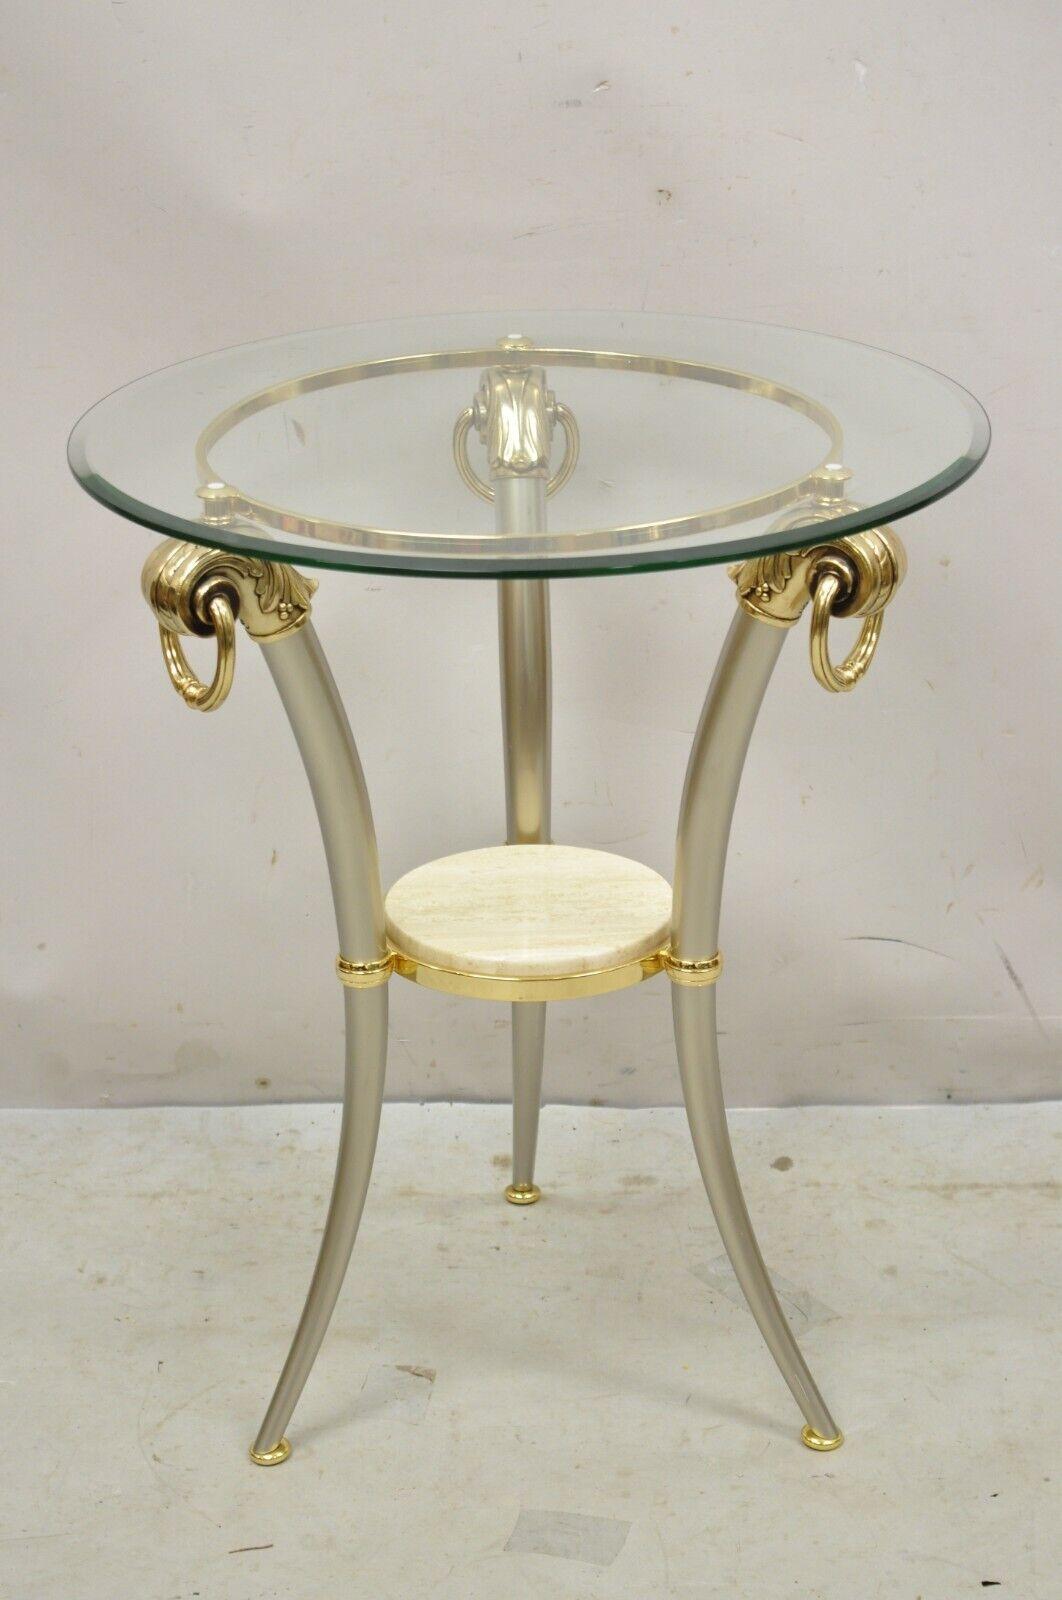 Vintage Italian Regency Style Steel and Brass Tripod Base Round Glass Top Side Table. Item features a beveled edge round glass top, small round travertine stone lower tier, steel metal frame, brass accents, quality craftsmanship, great style and